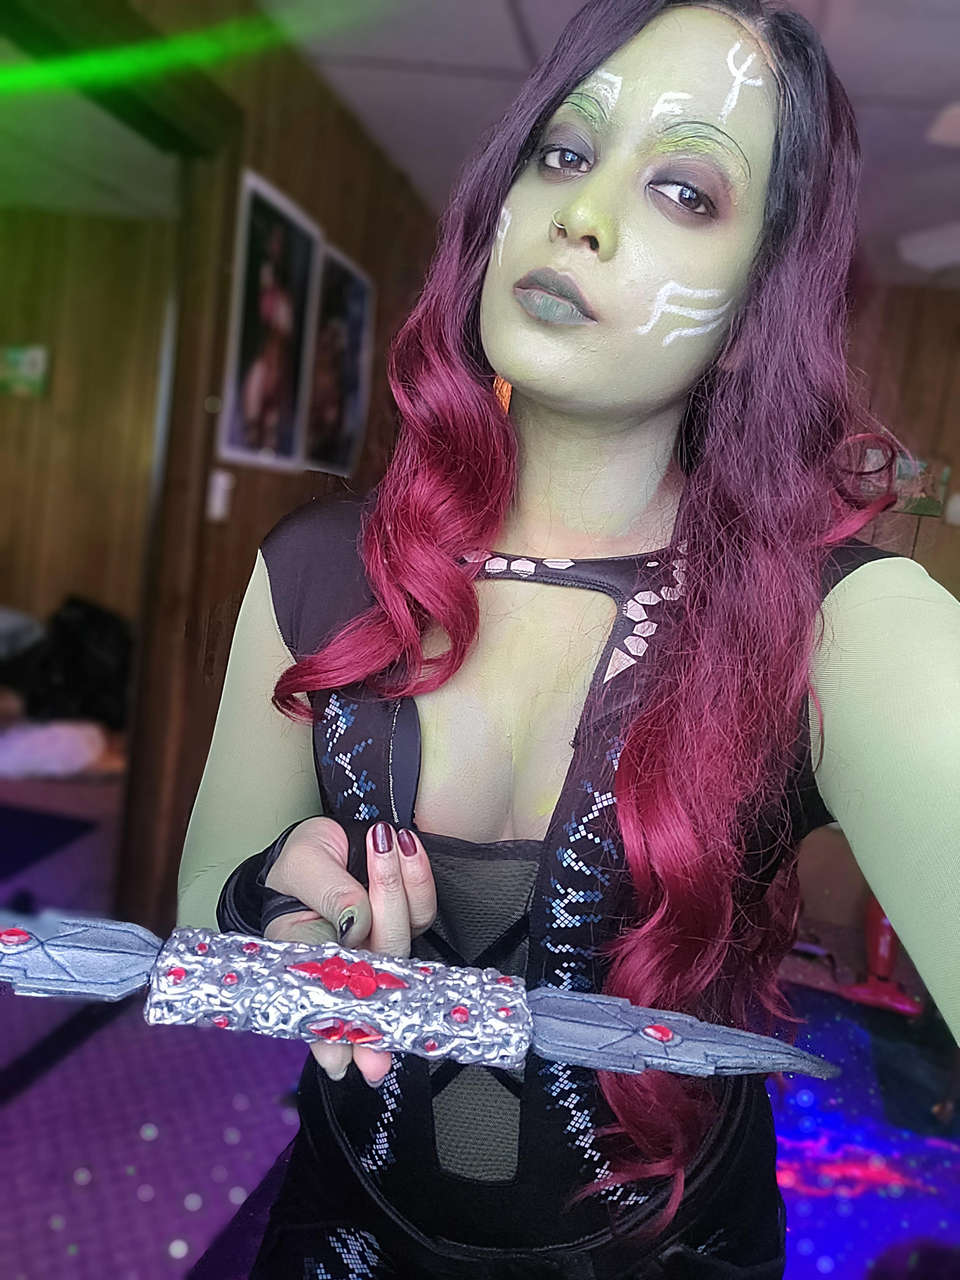 Gamora Cosplay With Foam Prop Made Out Of Popsicle Stick